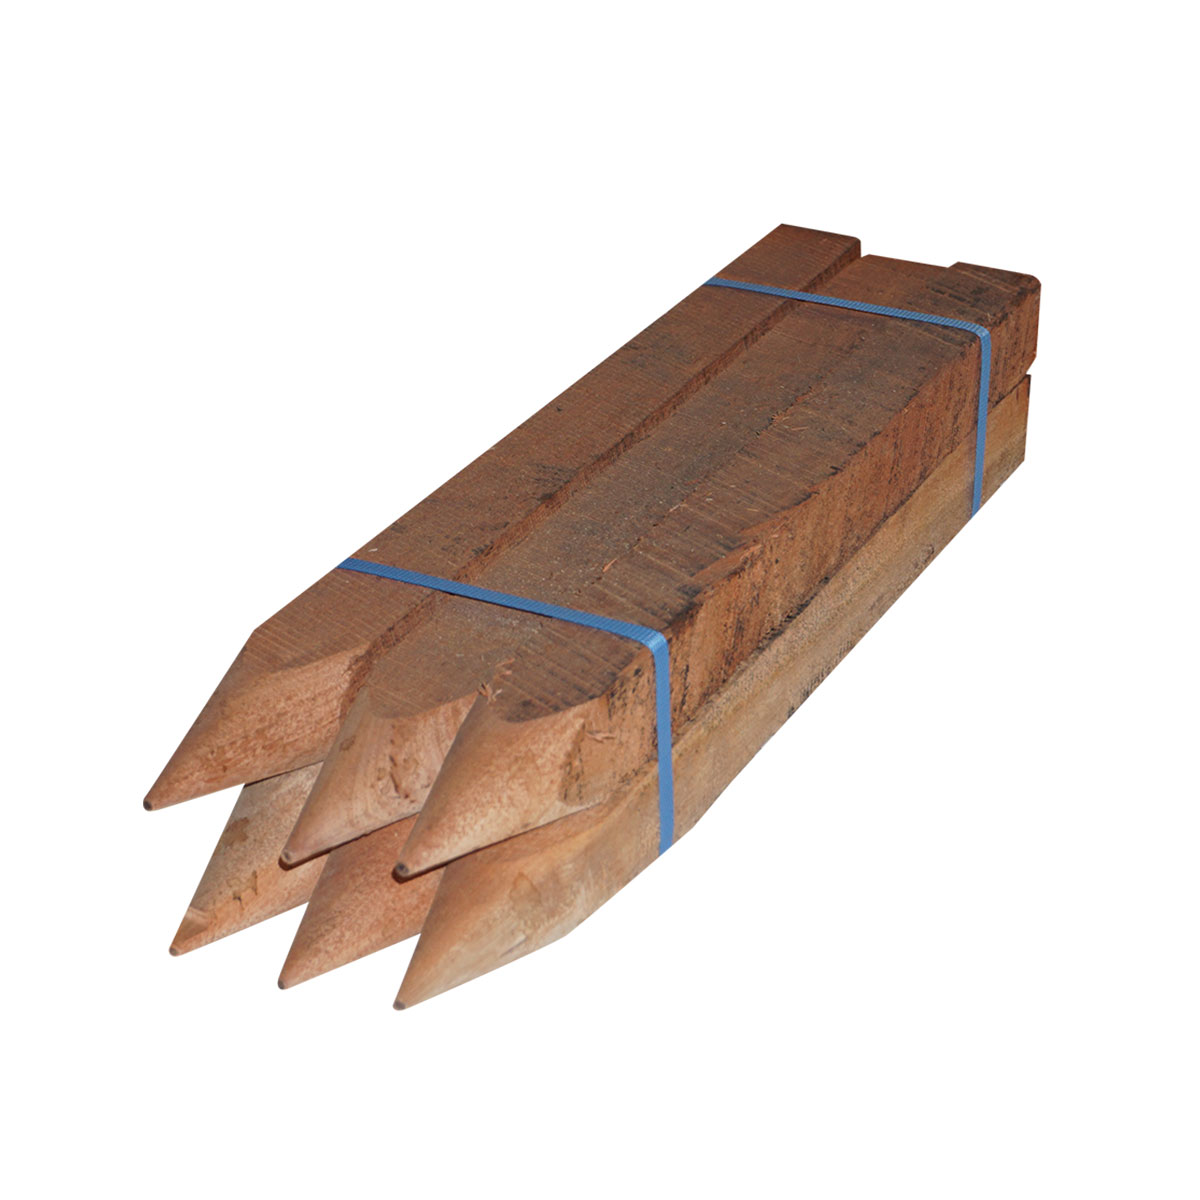 Hardwood Stakes 50 x 50 x 750mm - 6 Pack